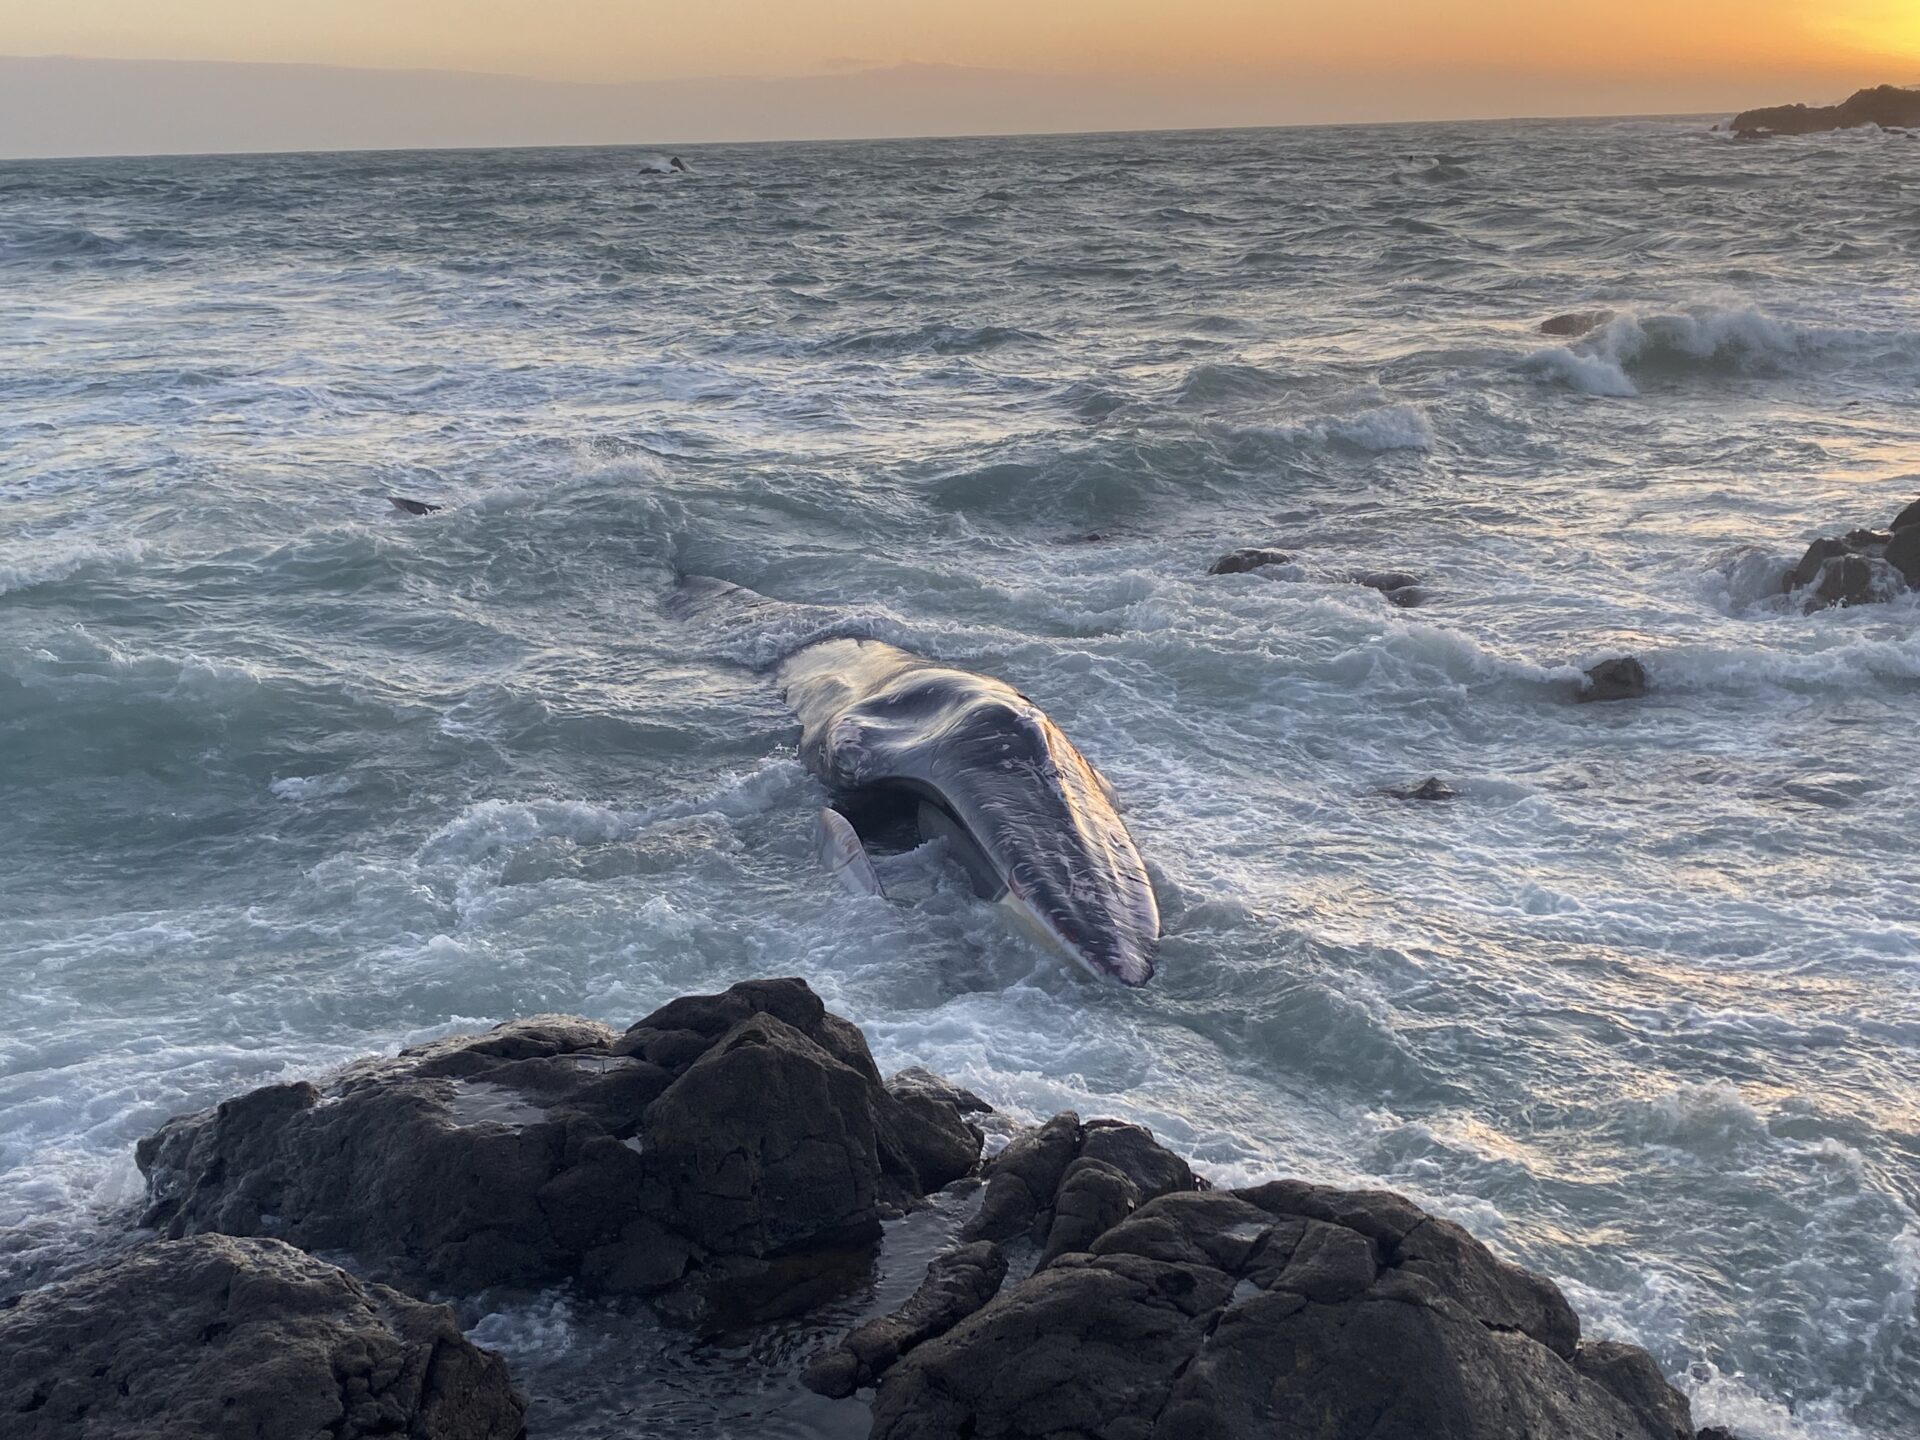 Fin whale washes up on Cornish beach